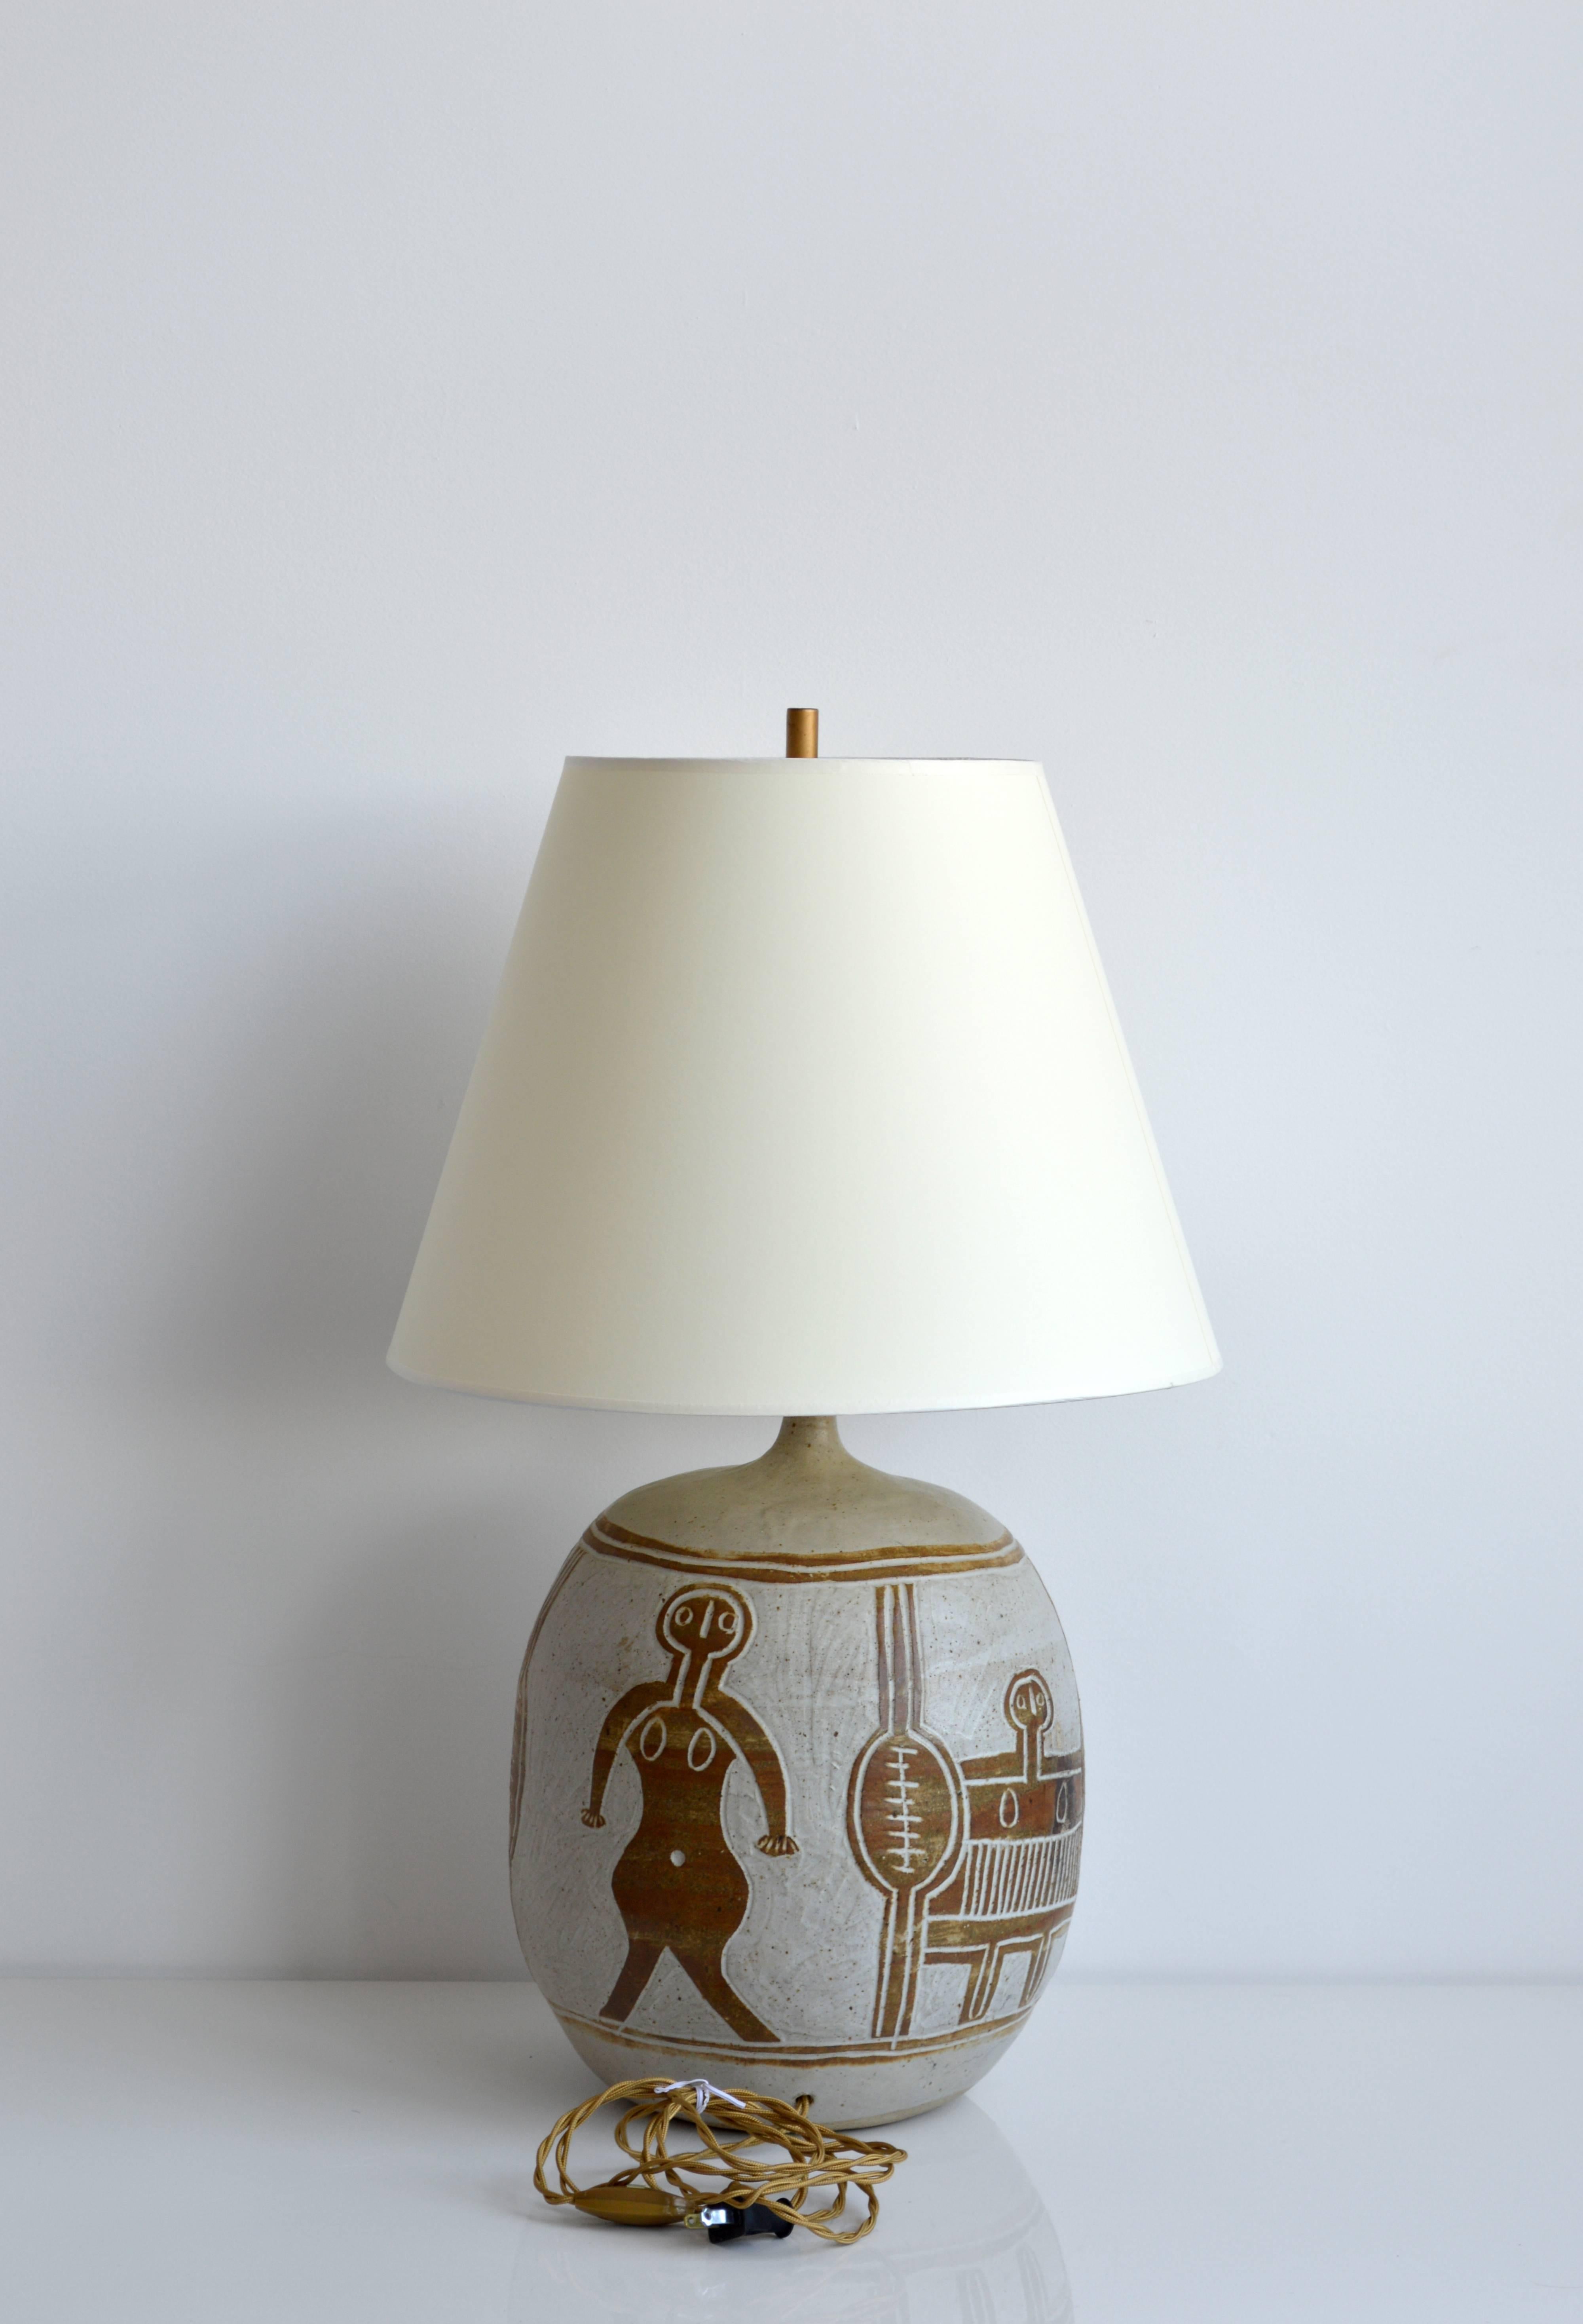 French Vintage Ceramic Table Lamp, 20th Century, France